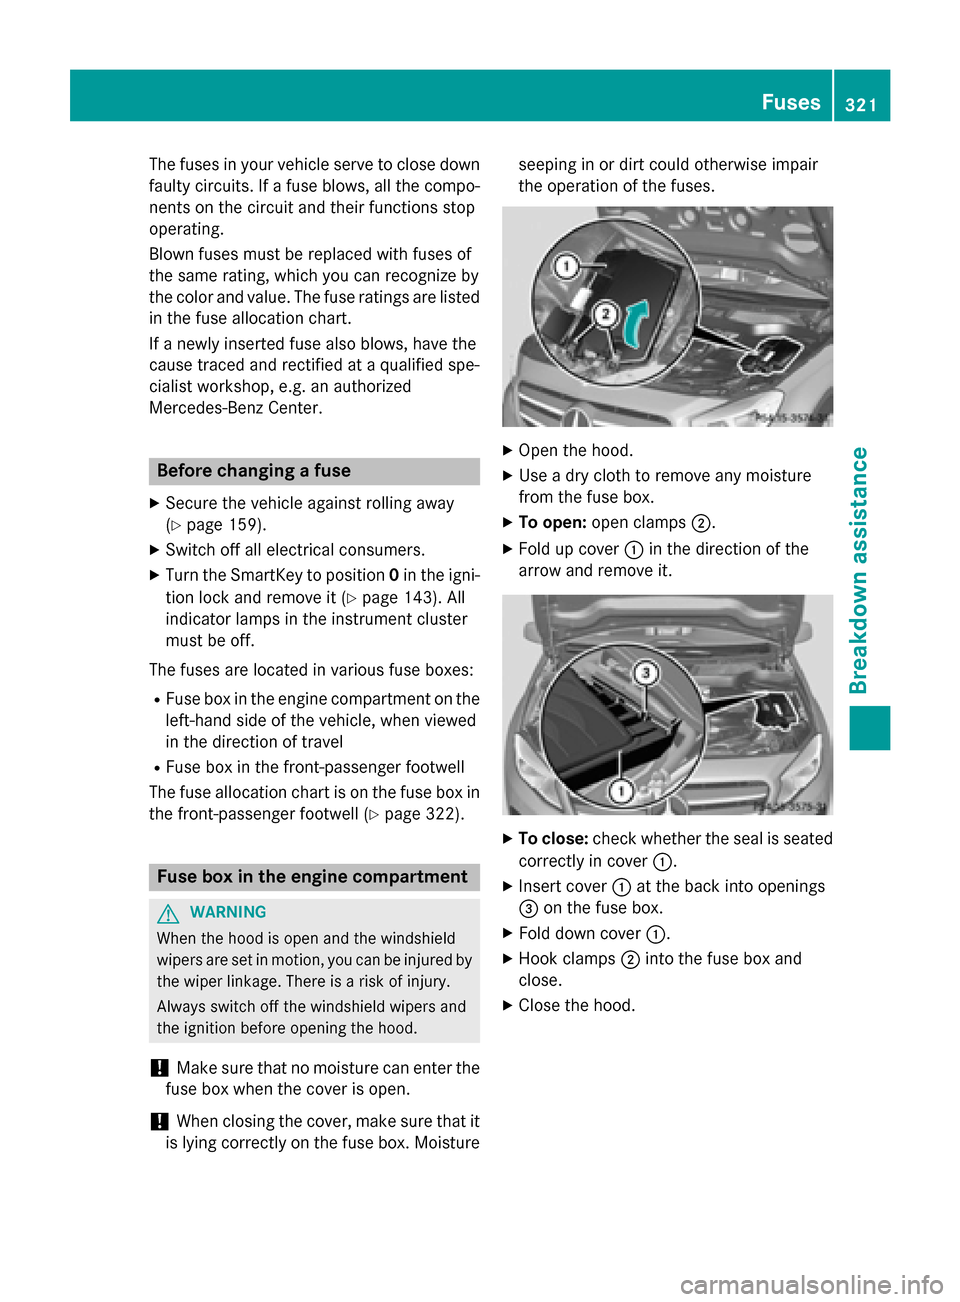 MERCEDES-BENZ GLA-Class 2015 X156 Owners Manual The fuses in your vehicle serve to close down
faulty circuits. If a fuse blows, all the compo-
nents on the circuit and their functions stop
operating.
Blown fuses must be replaced with fuses of
the s